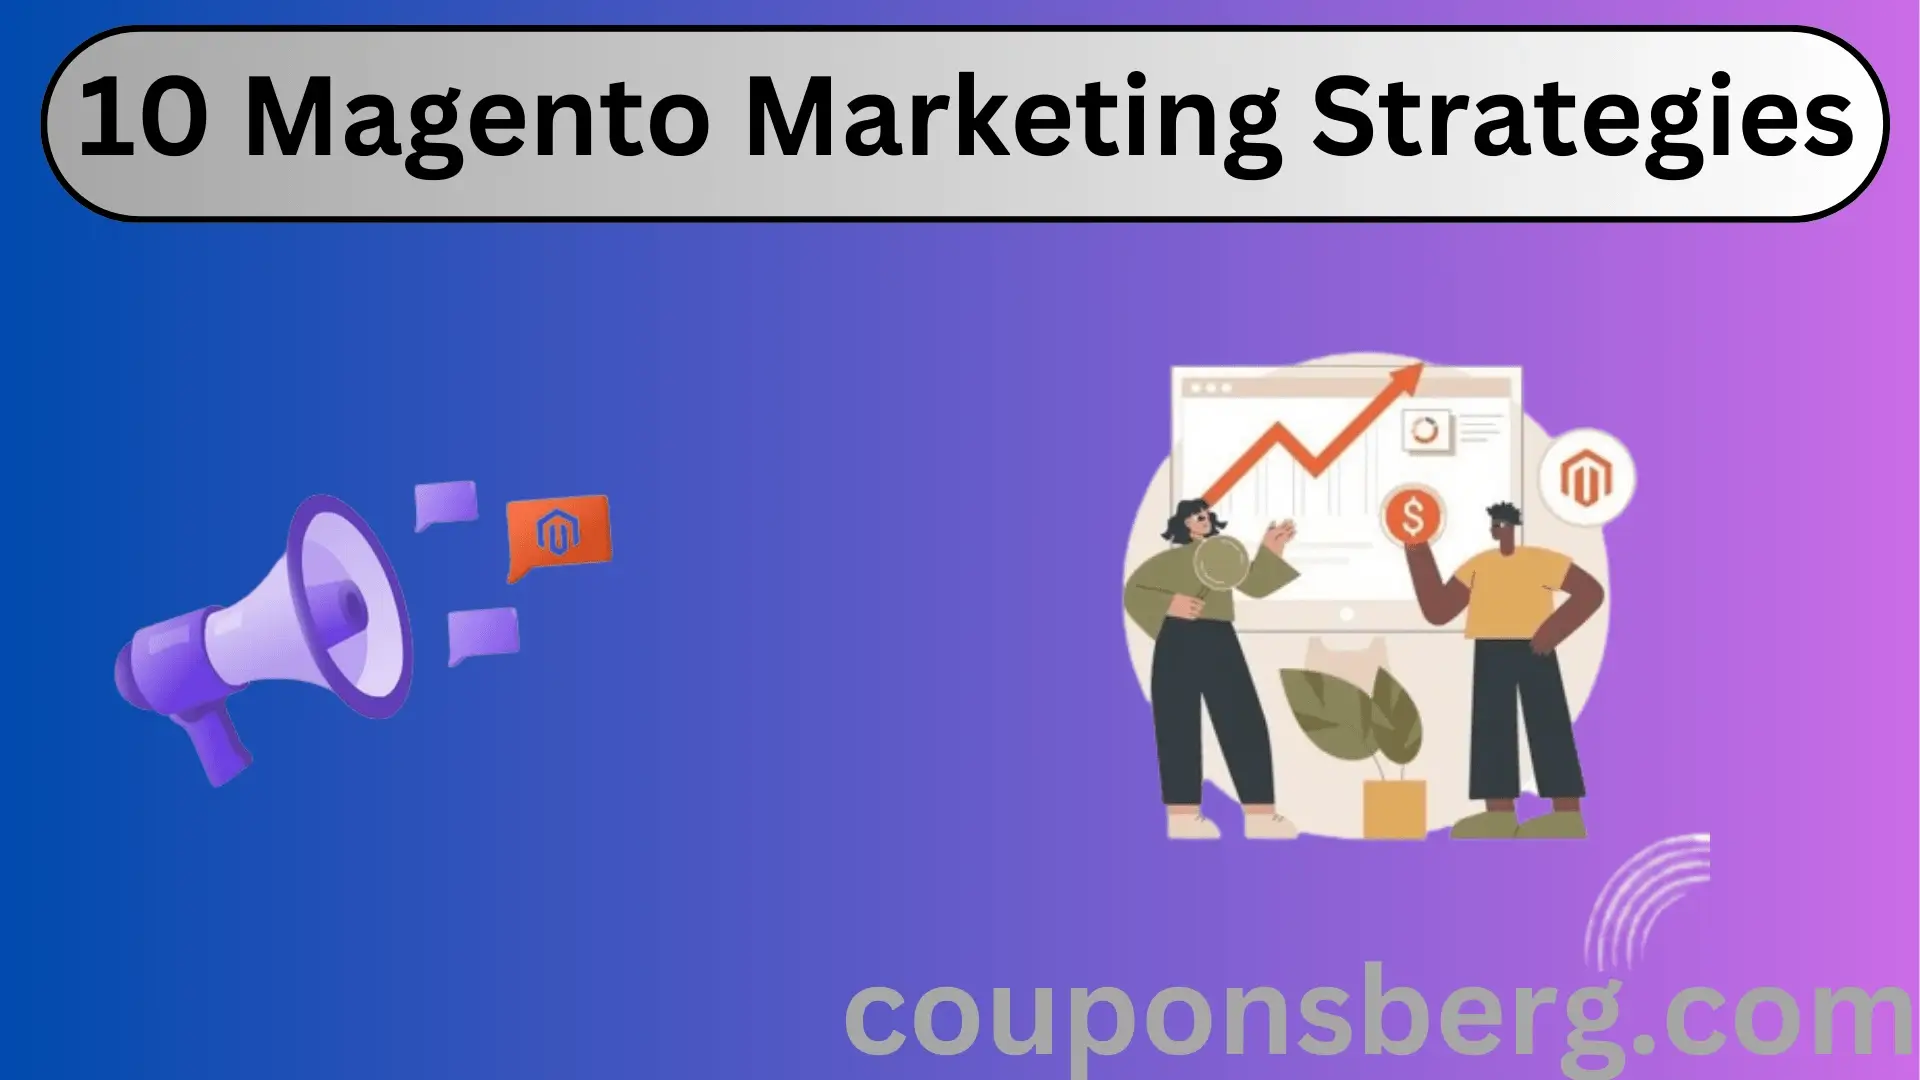 10 Magento Marketing Strategies That’ll Help You Boost Conversions